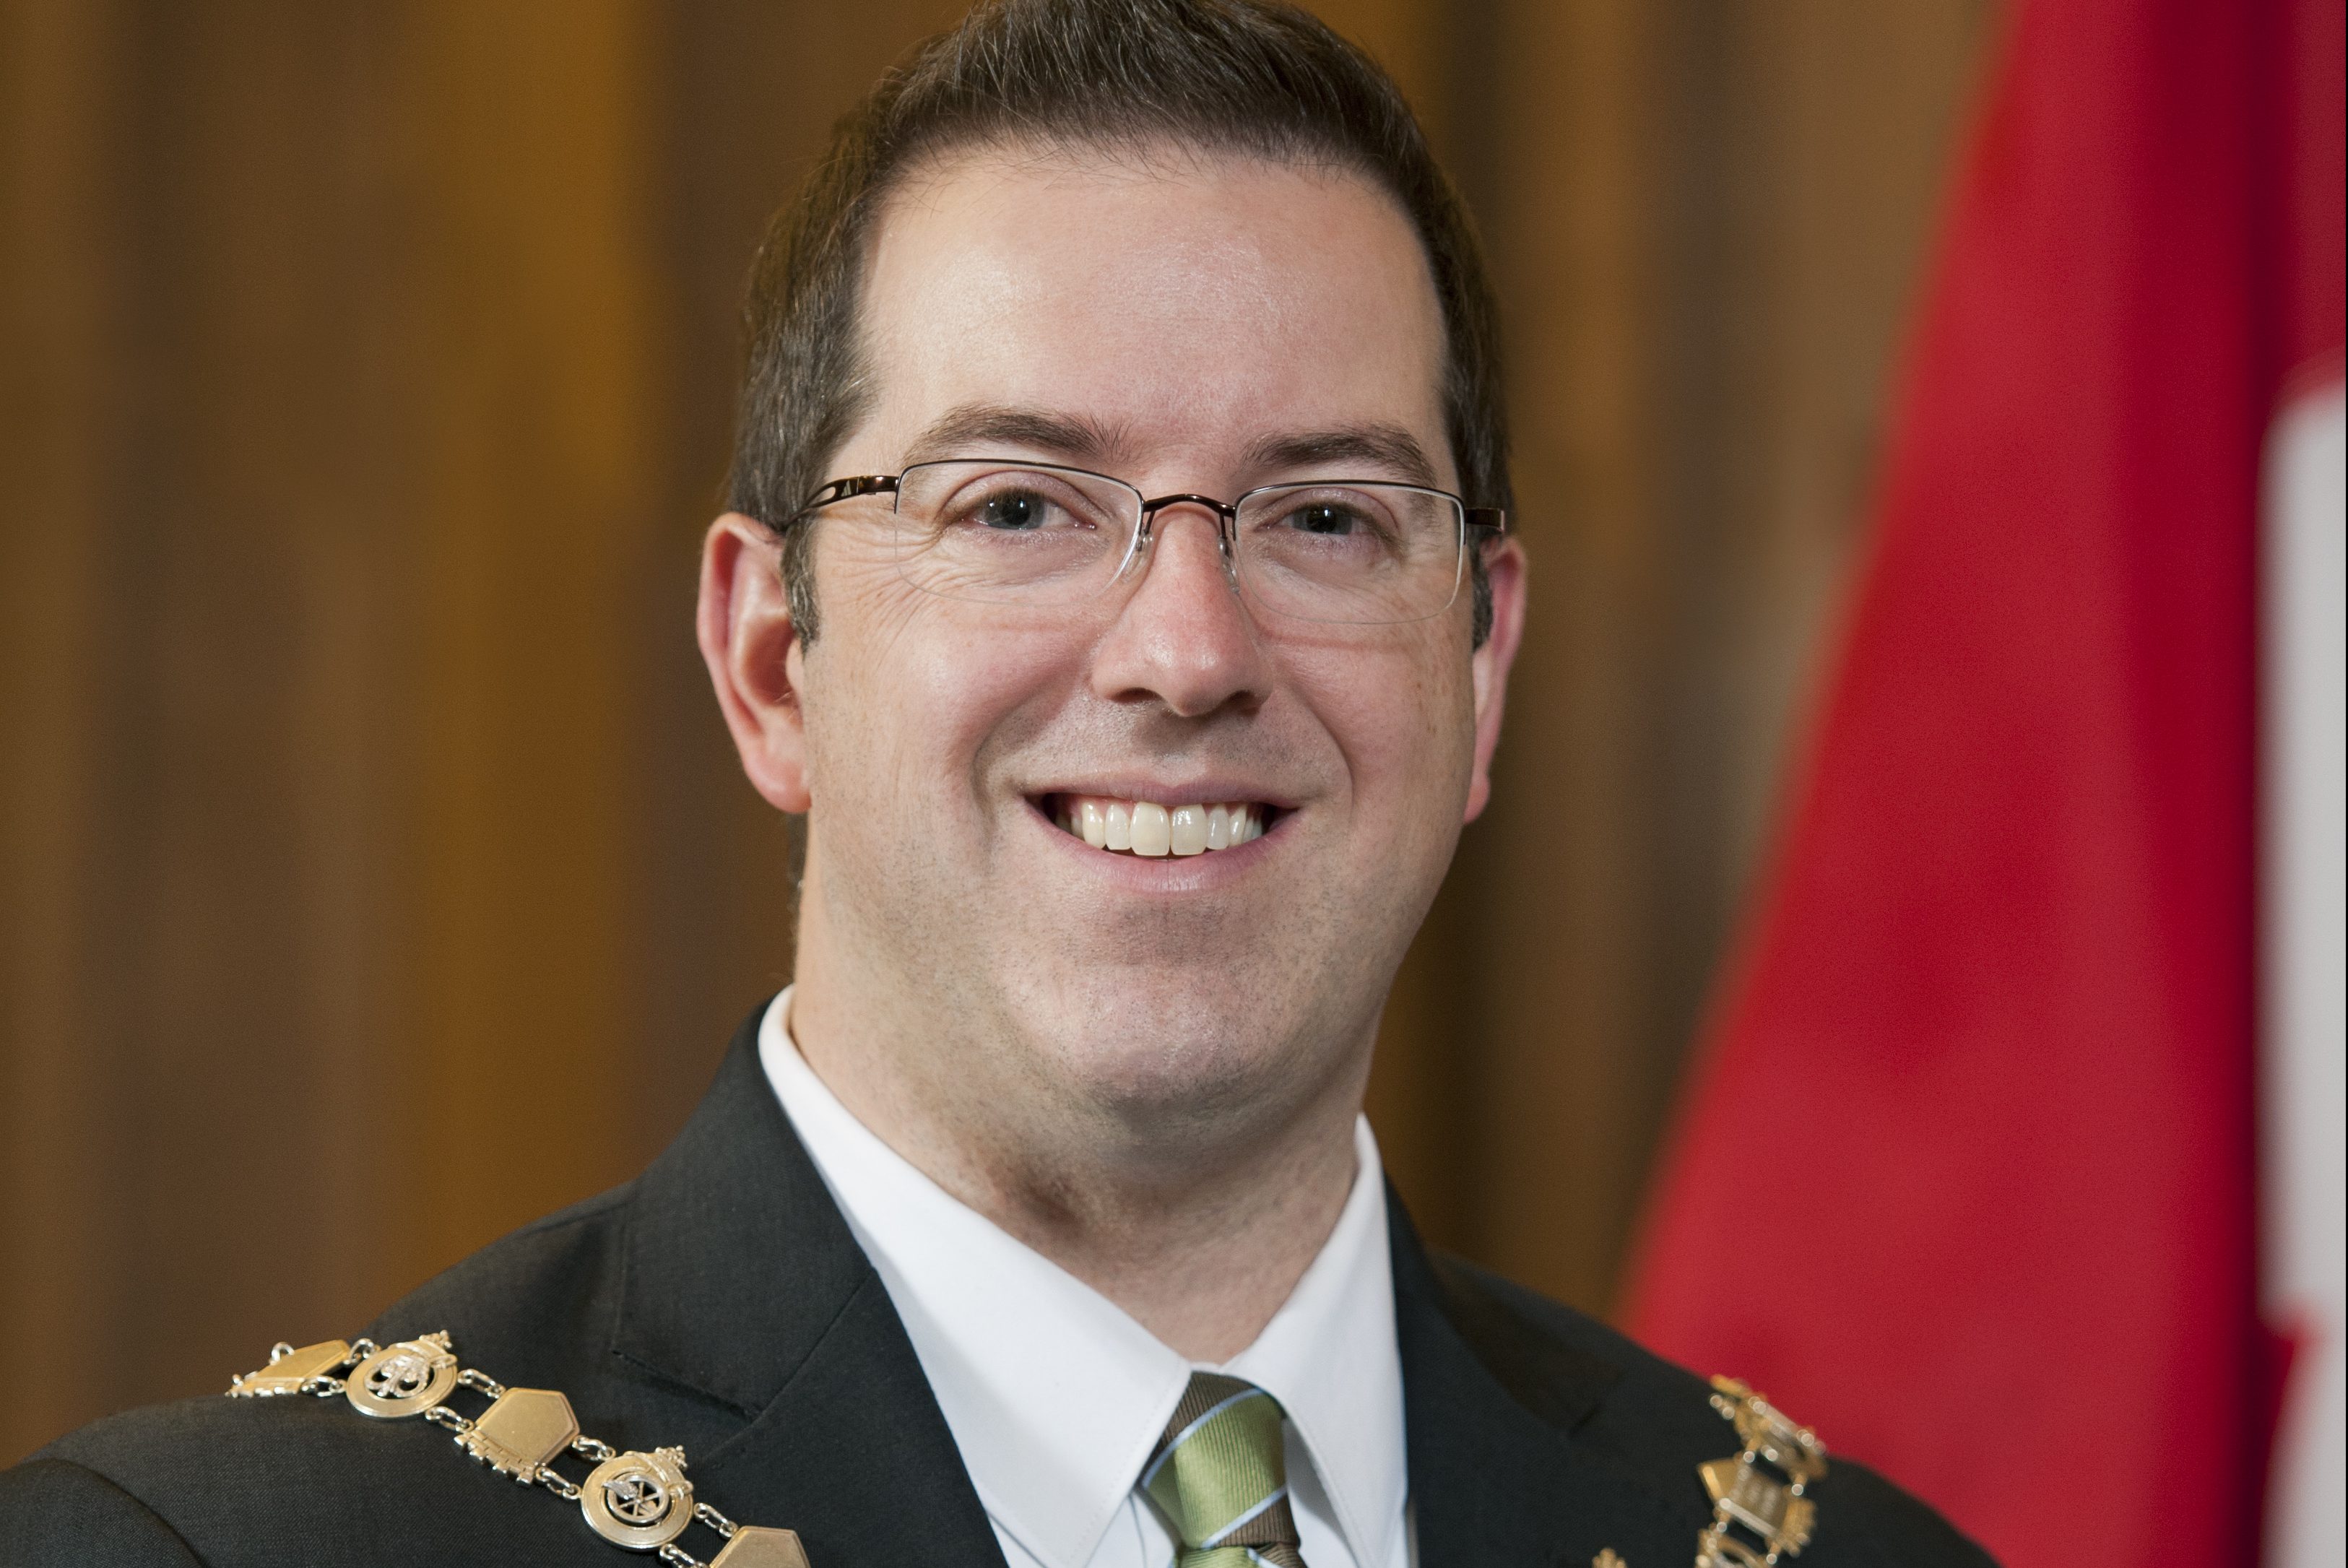 Guelph mayor ‘surprised’ by province’s decision to reverse course on housing development